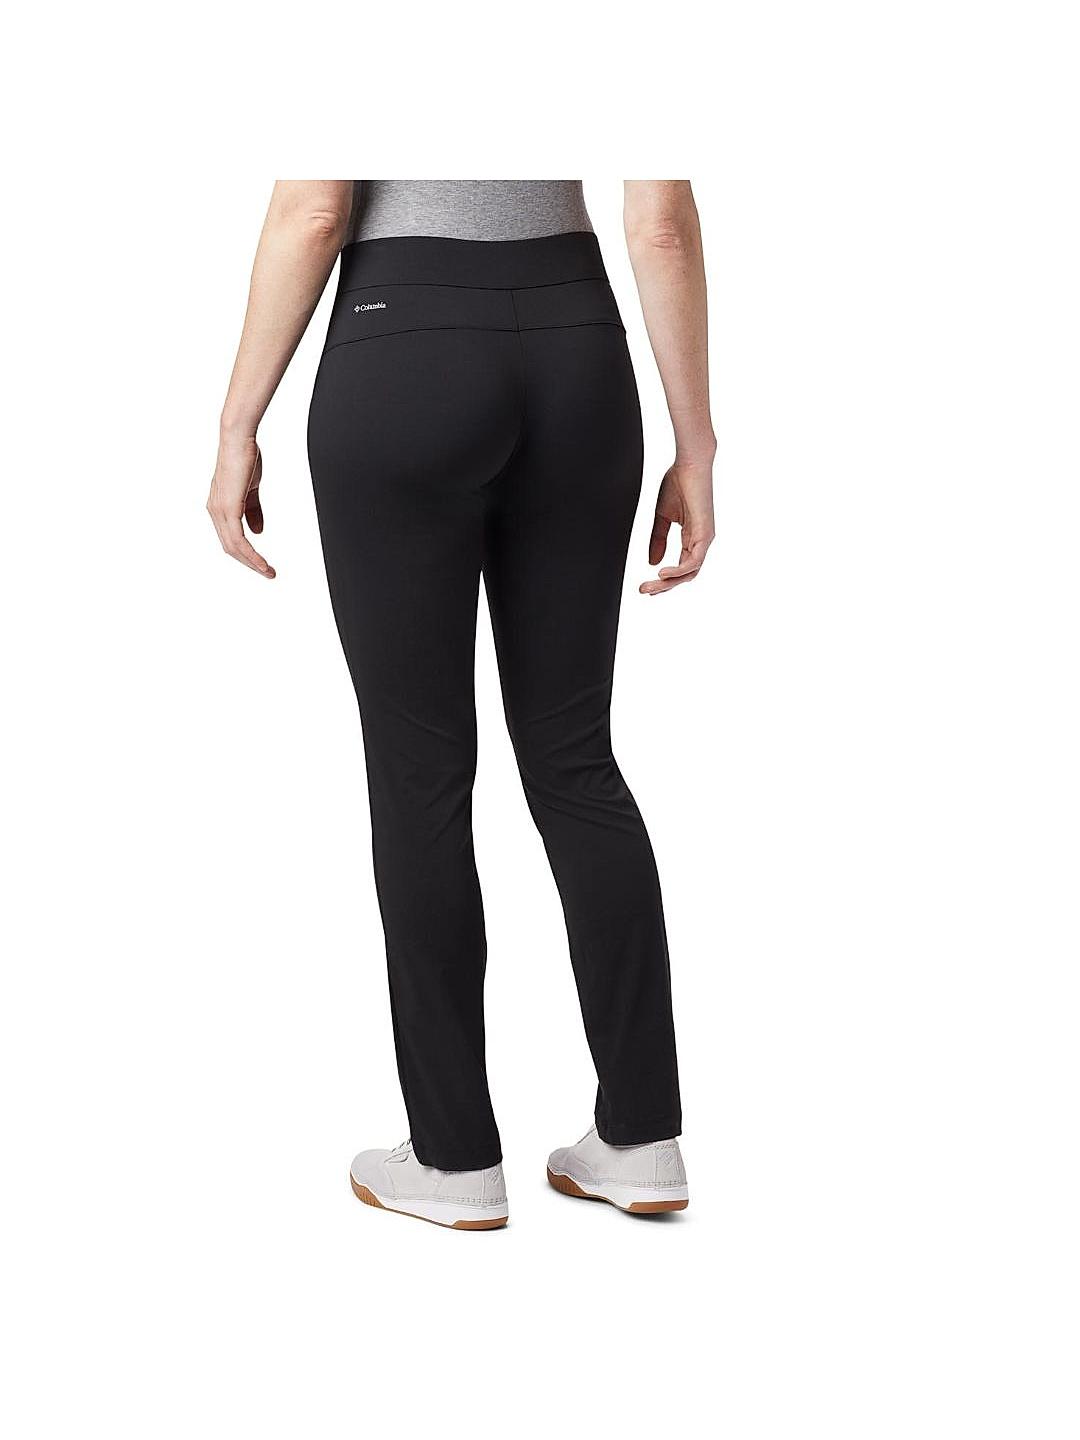 Columbia Casual Athletic Pants for Women